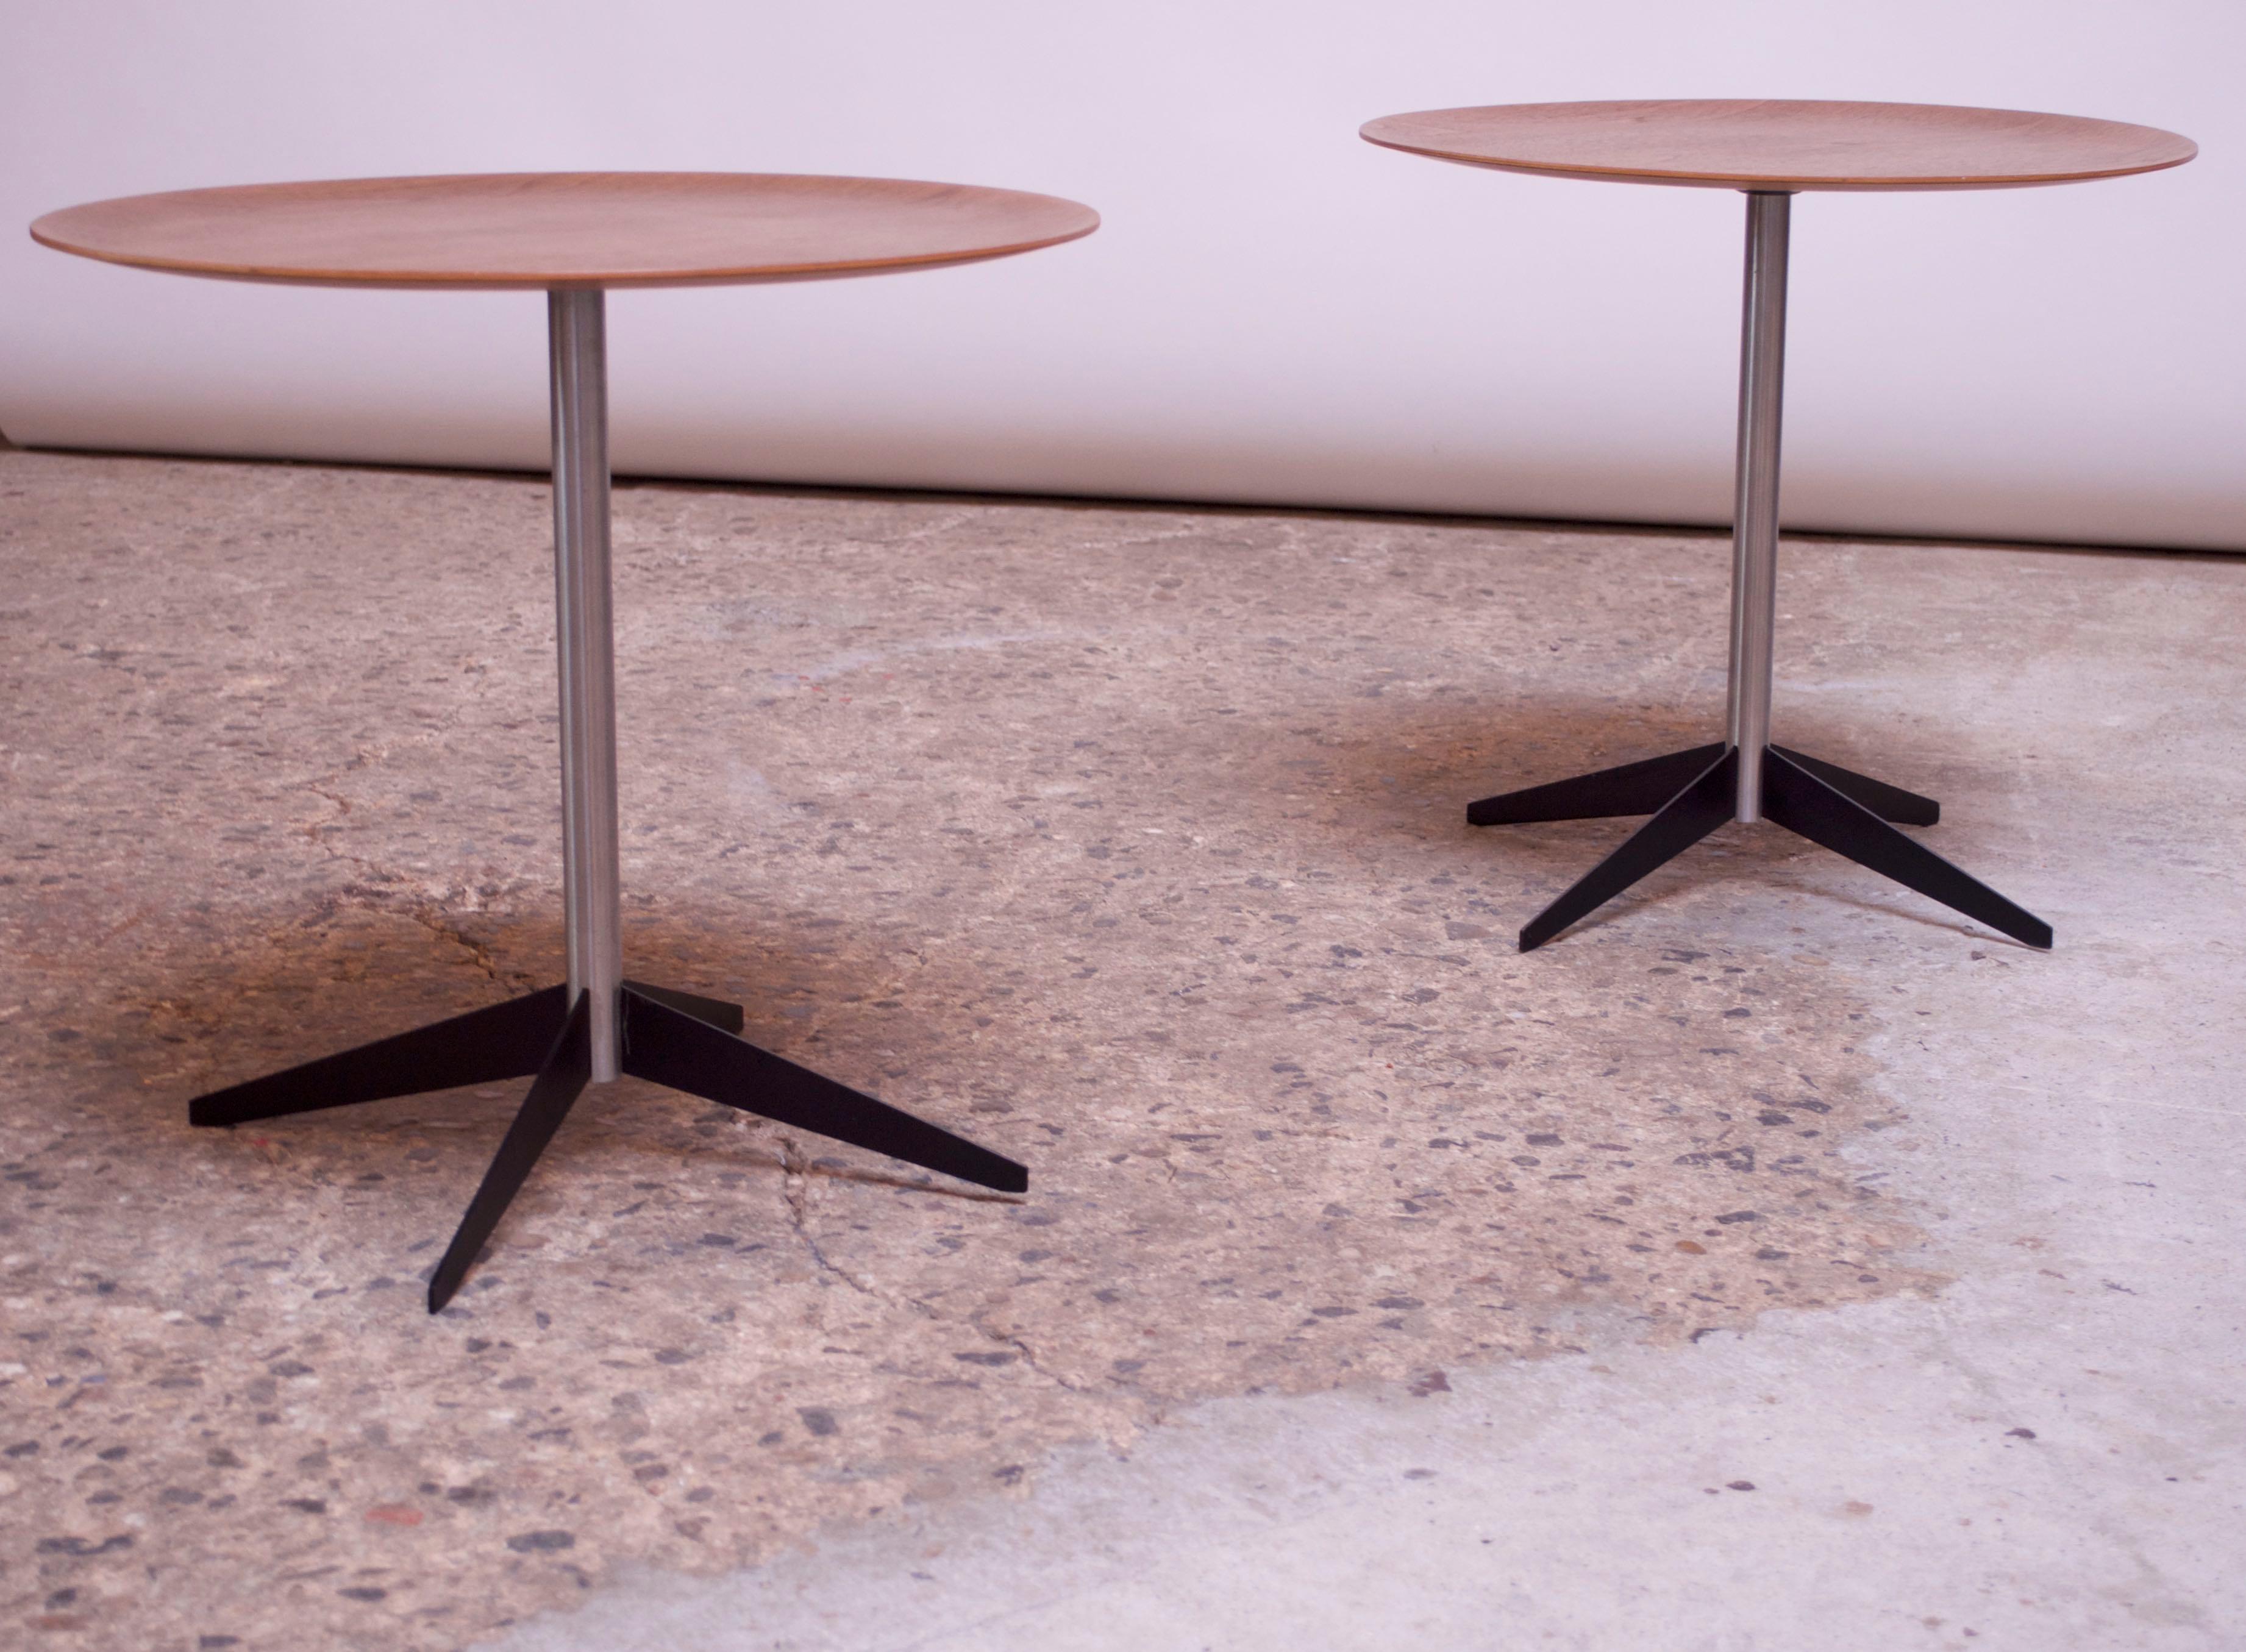 Enameled Pair of Vintage Walnut and Steel Tray Tables By George Nelson for Herman Miller